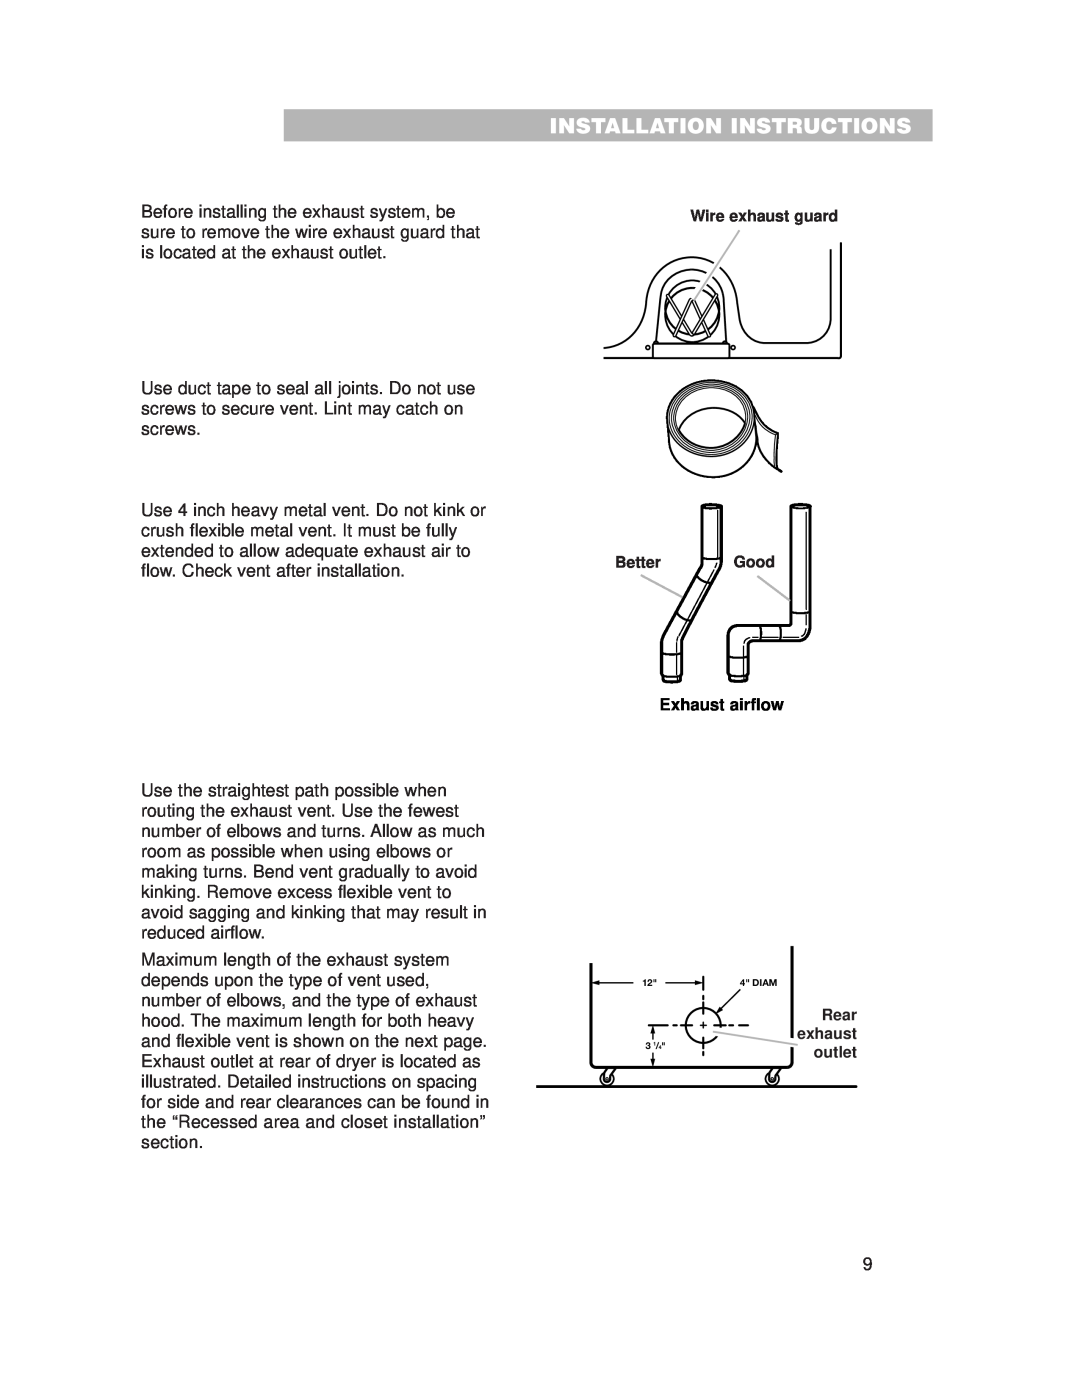 Whirlpool 3977631 installation instructions Installation Instructions, Exhaust airflow, Wire exhaust guard BetterGood 